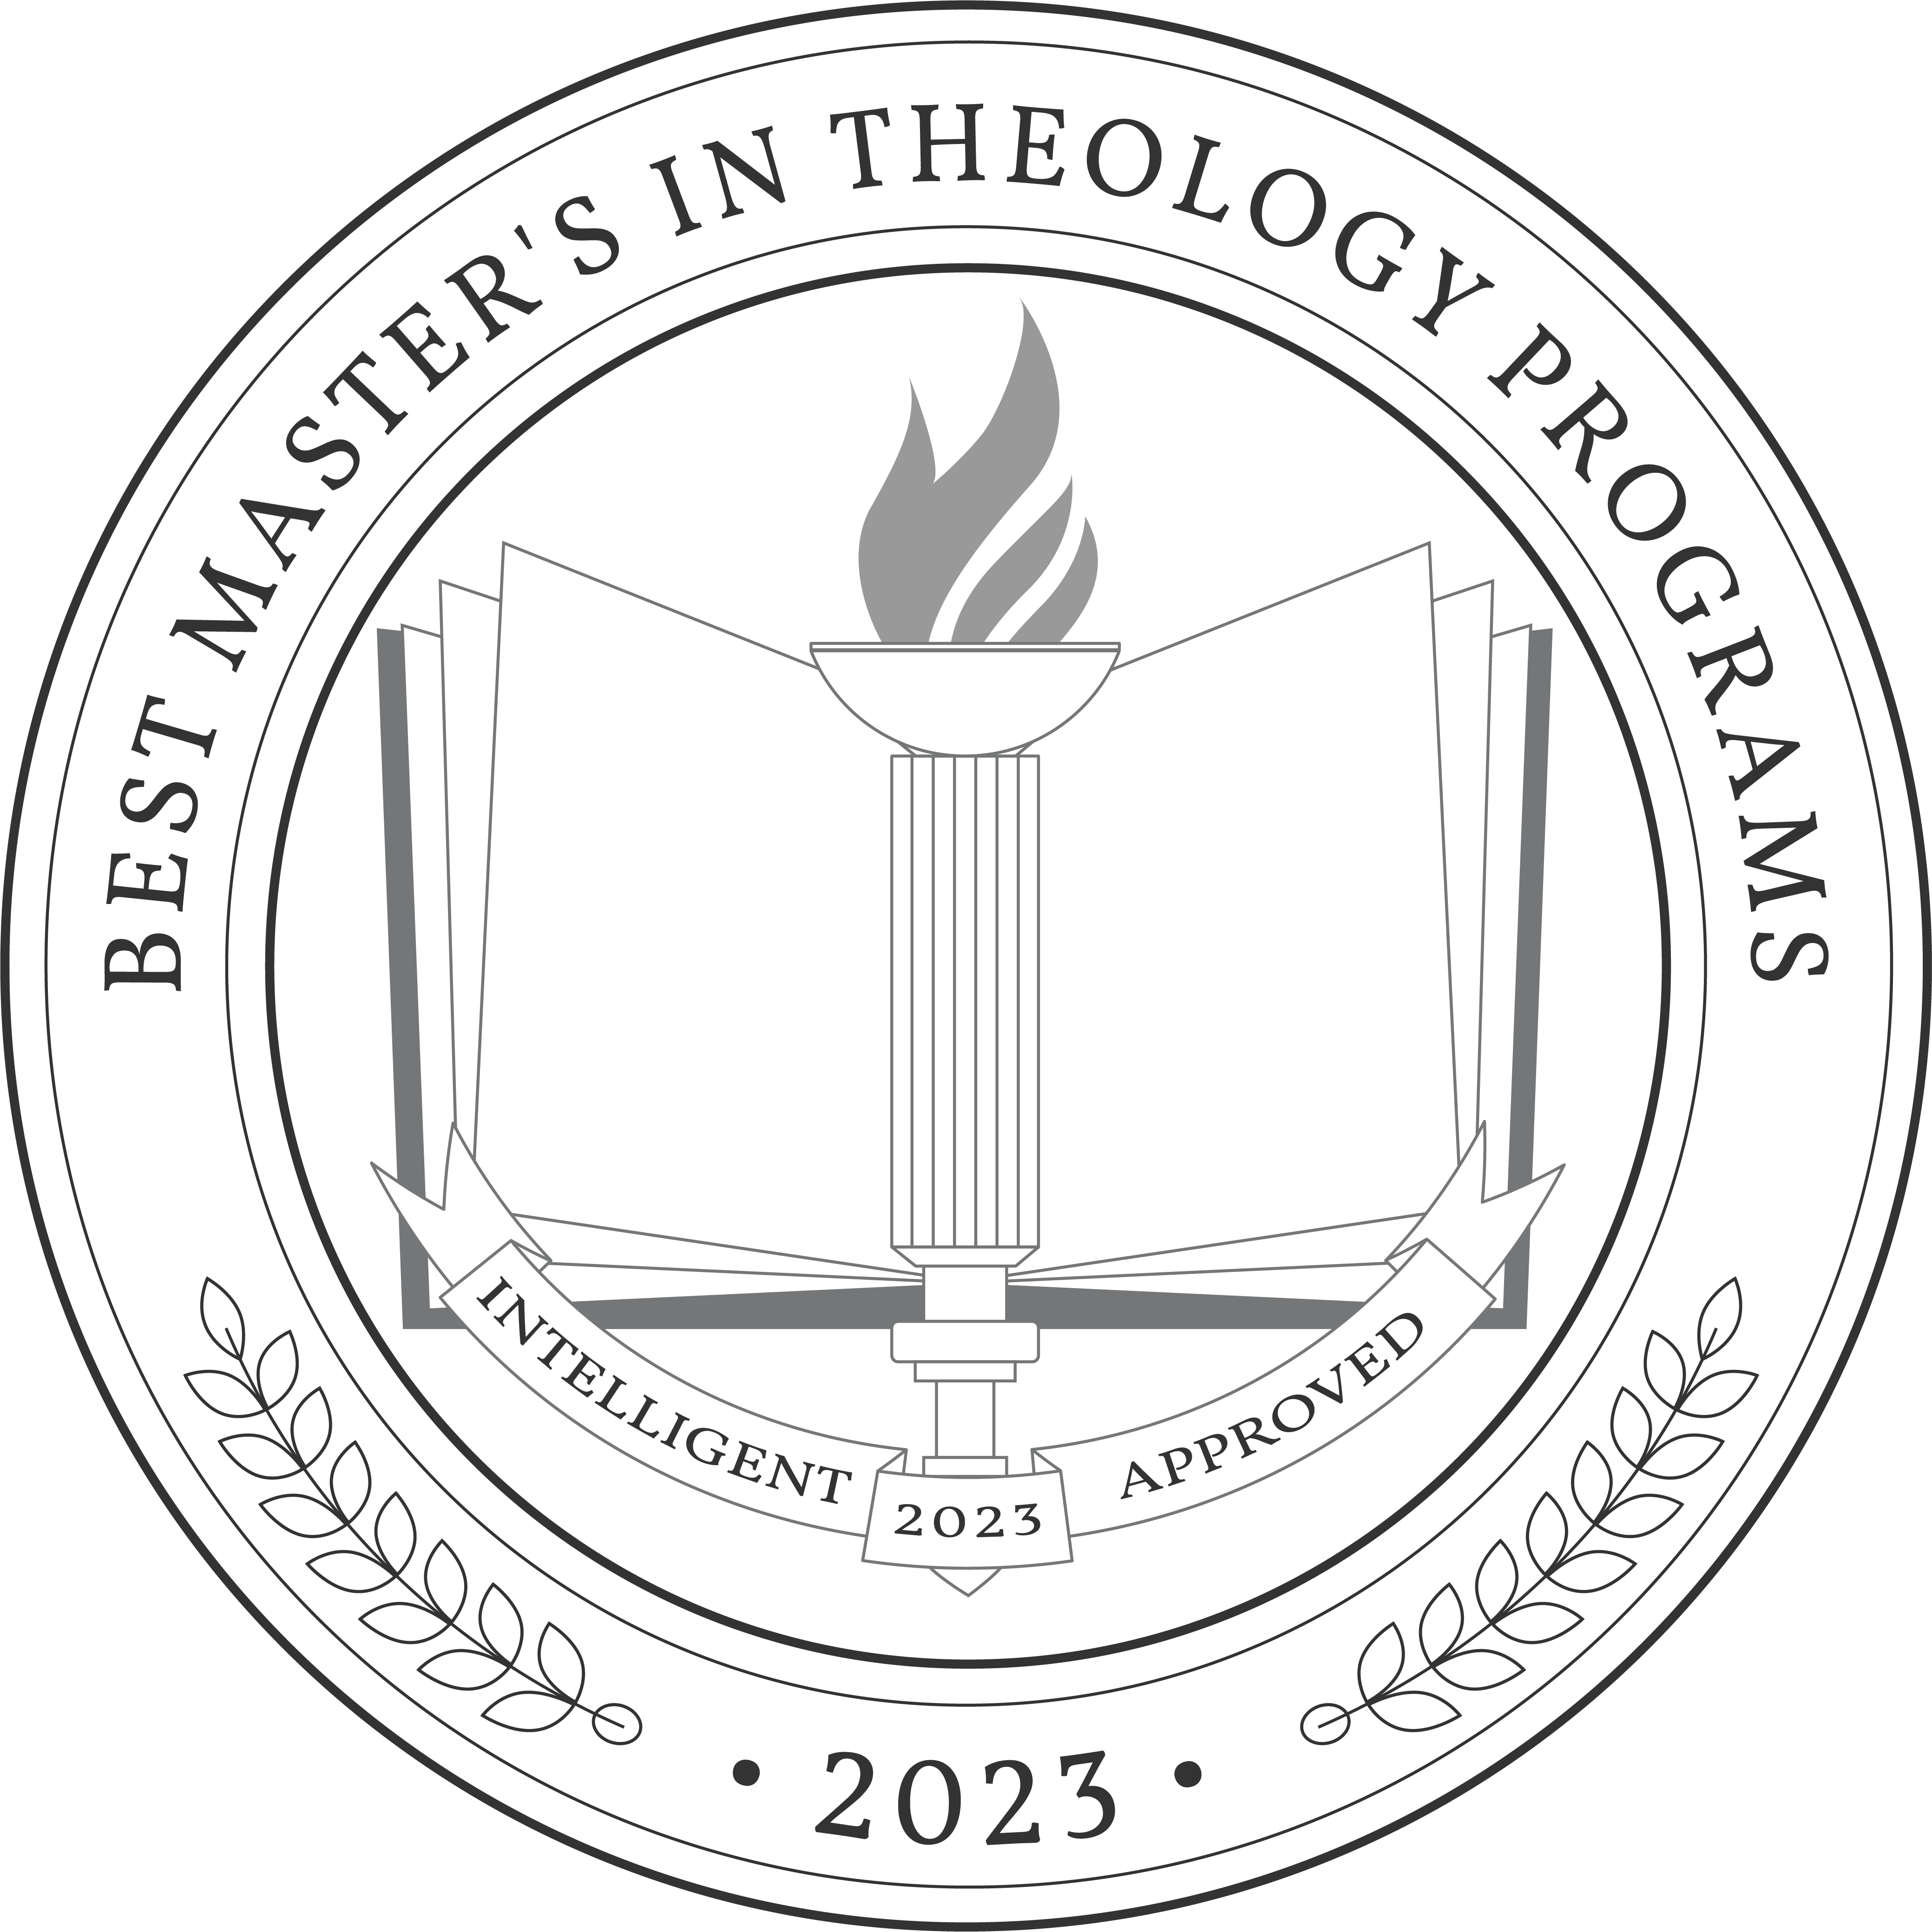 Best Master's in Theology Programs badge